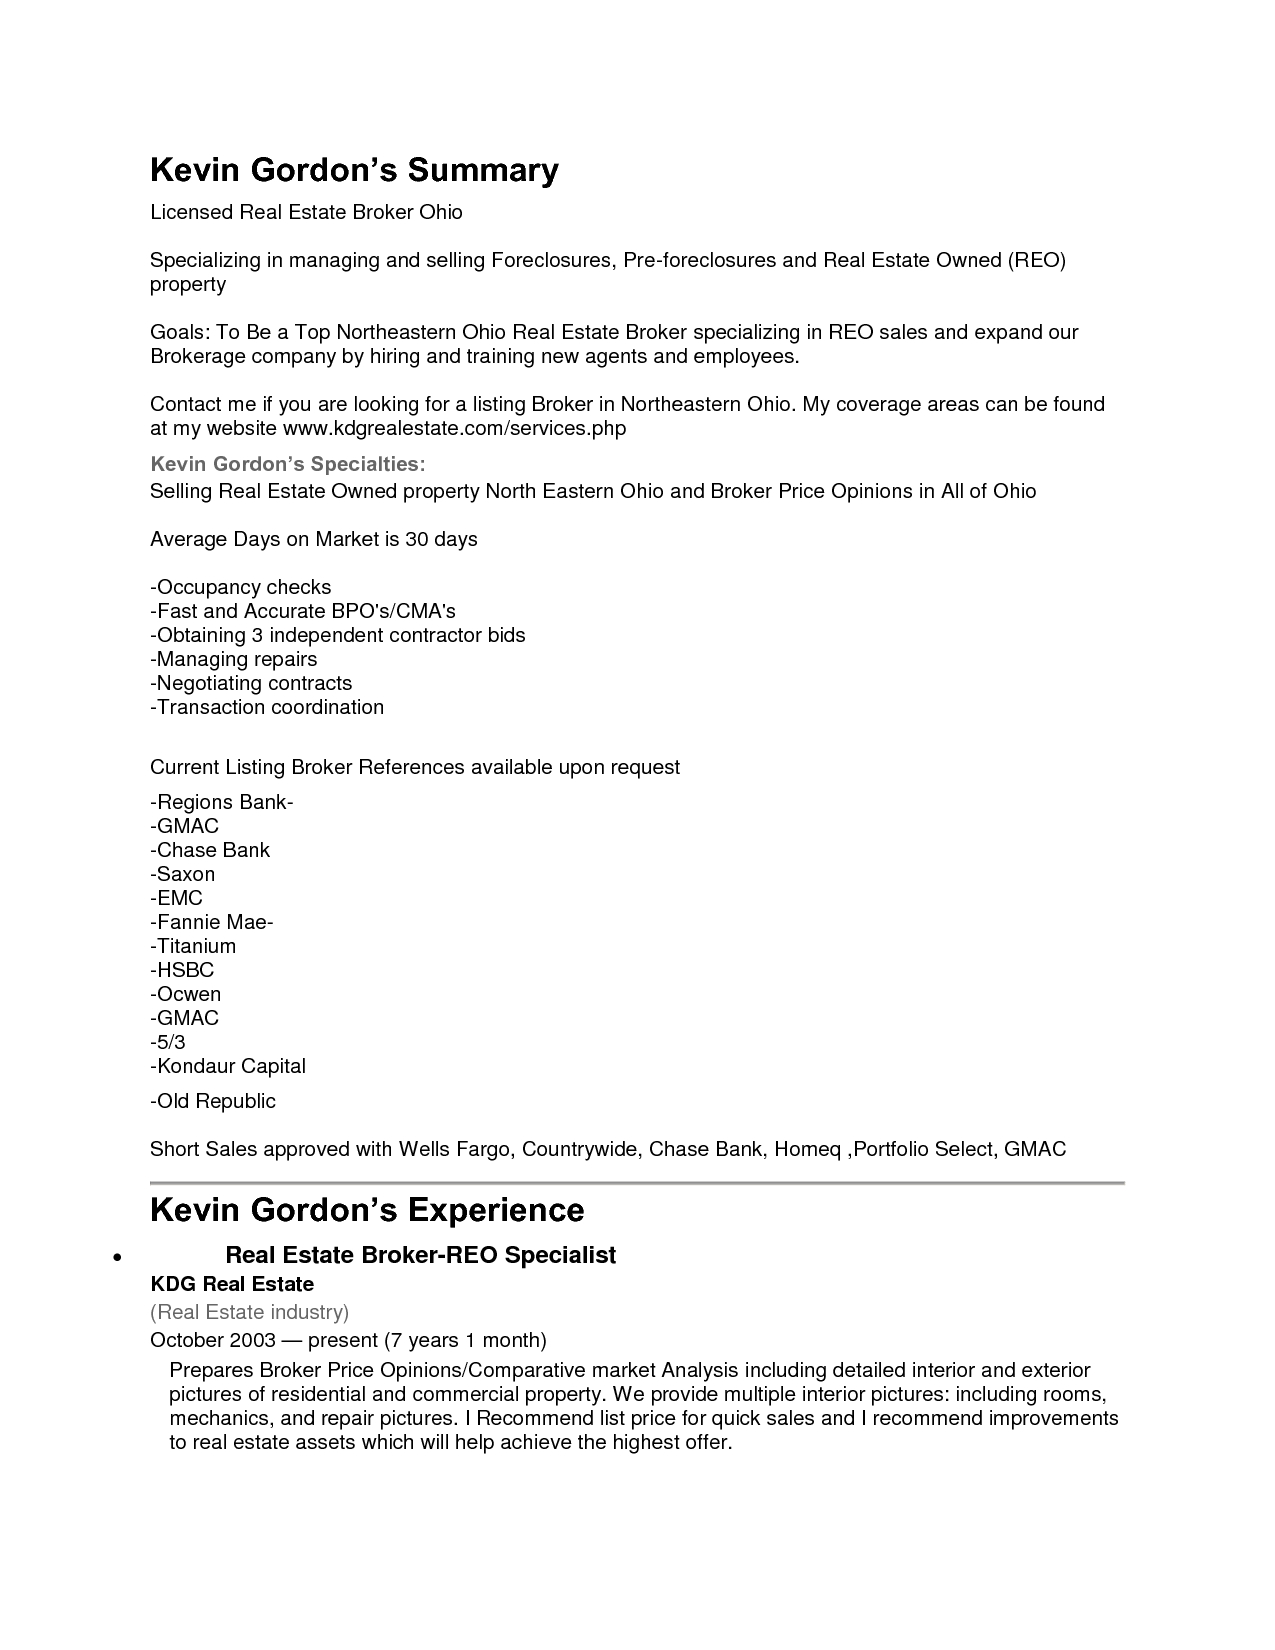 Real Estate Commission Letter Template - Real Estate Agent Resume with Summary and Work Experiences Sample Of